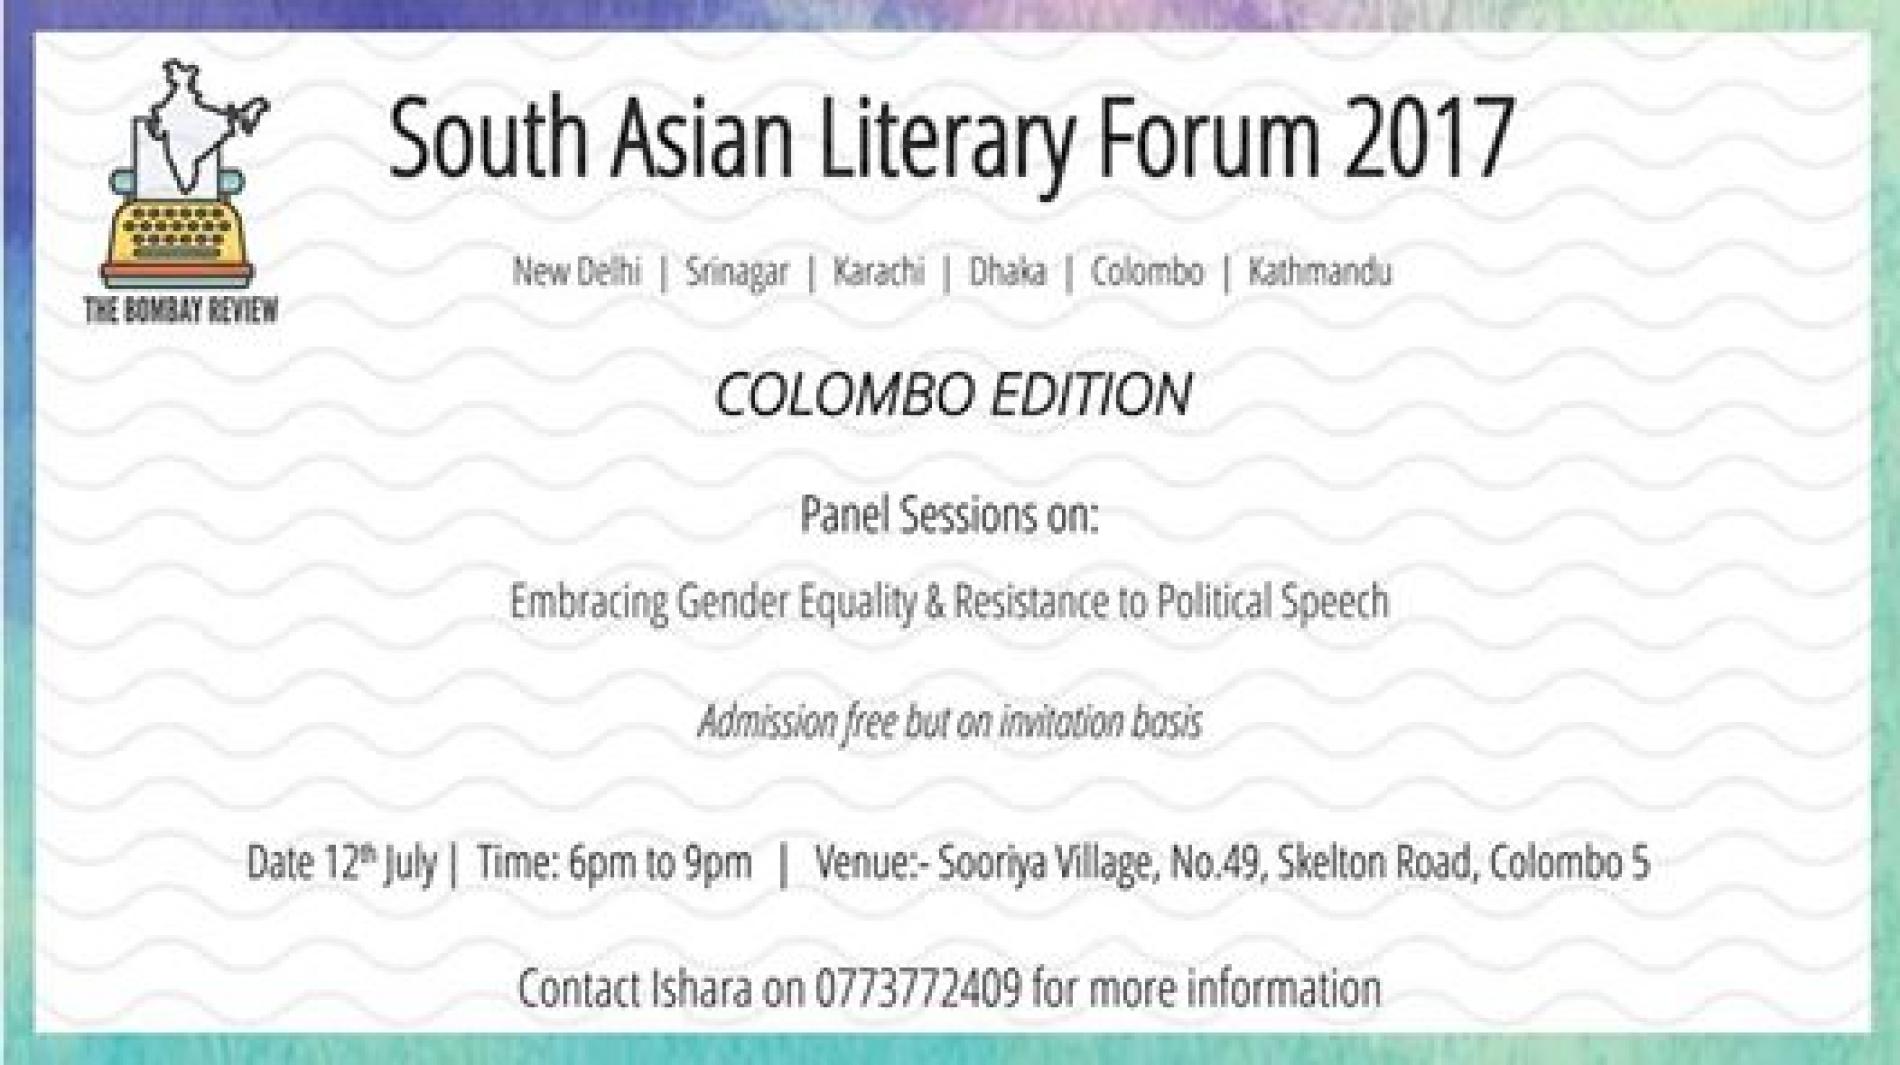 South Asian Literary Forum 2017 (Colombo Edition)